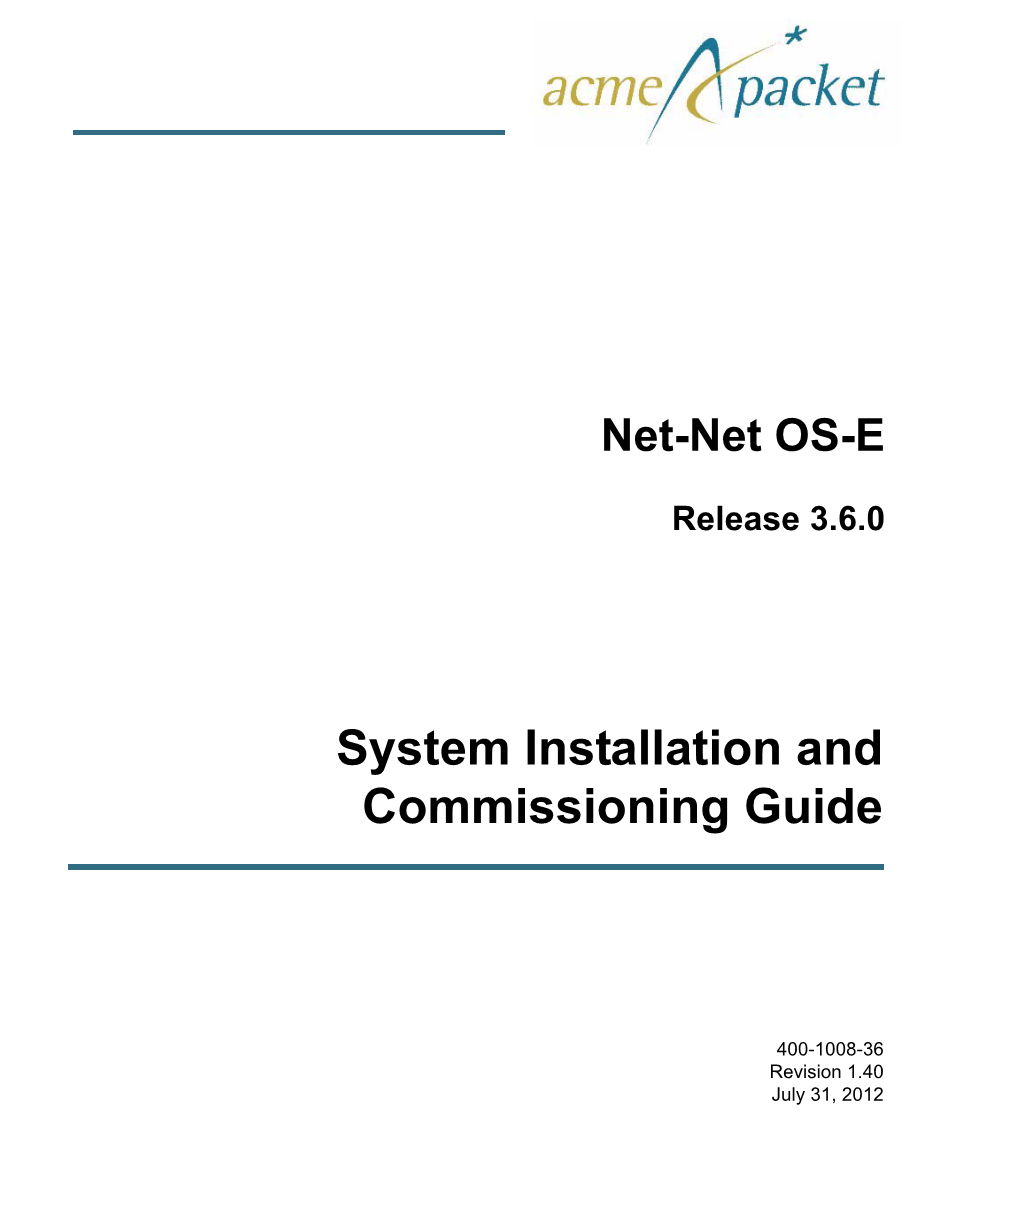 Net-Net OS-E System Installation and Commissioning Guide